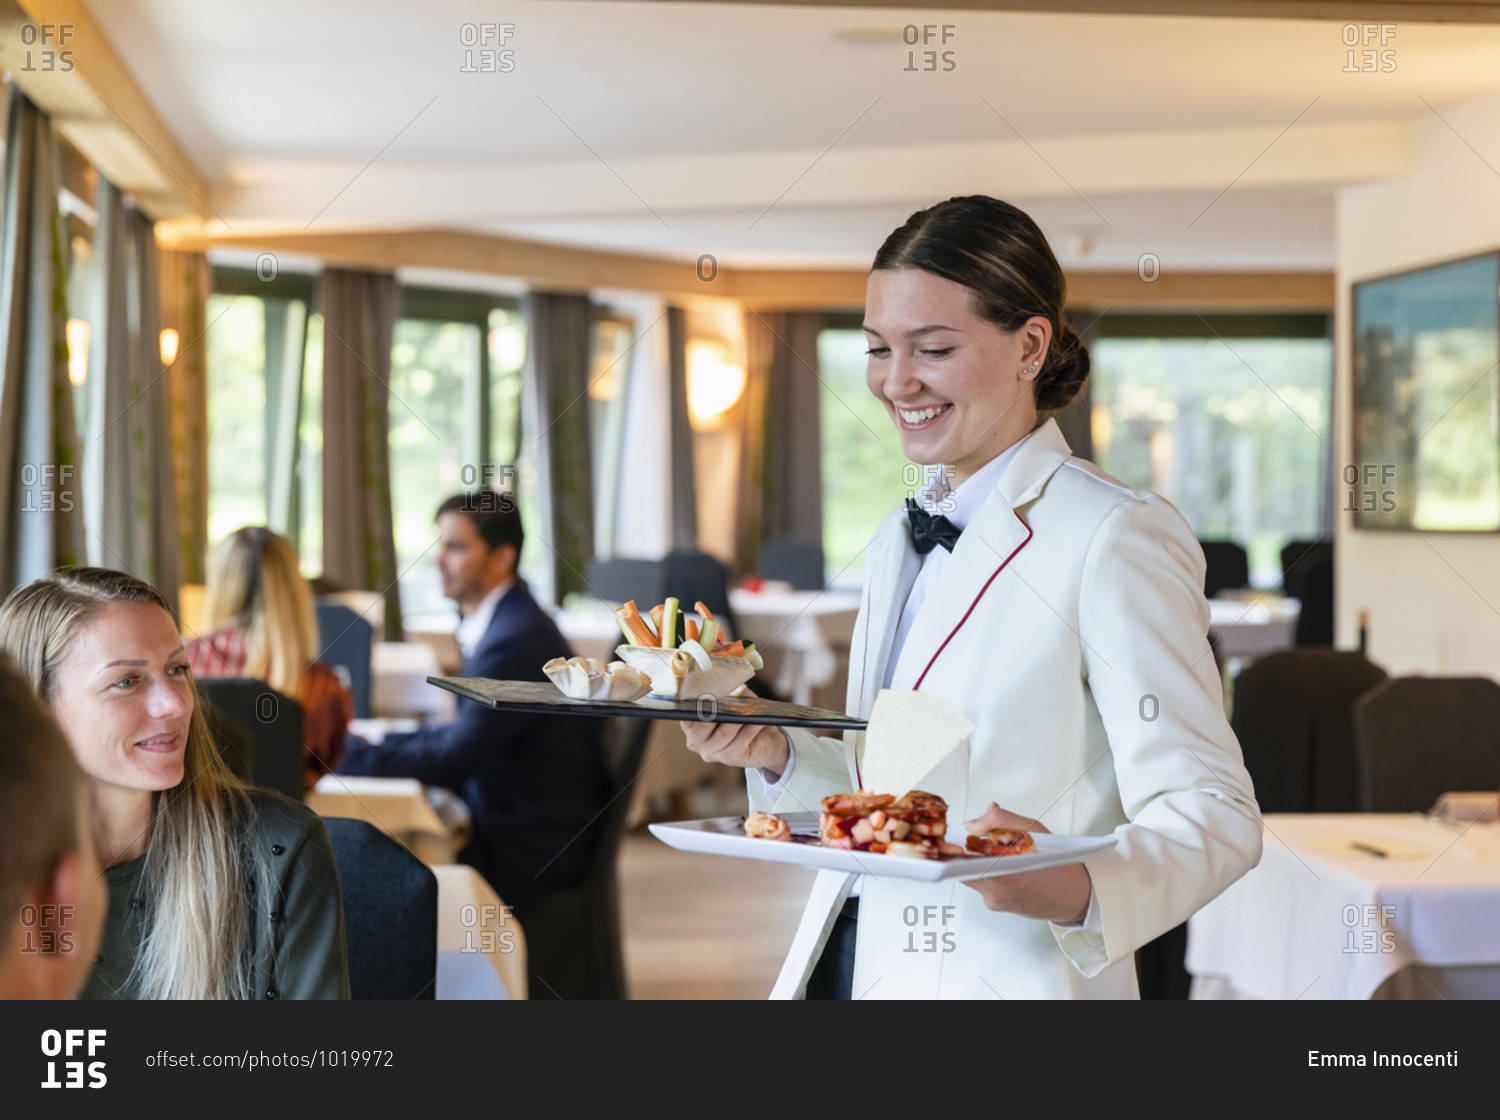 Positive woman in uniform smiling and carrying plates with exquisite food for clients while working in cozy restaurant